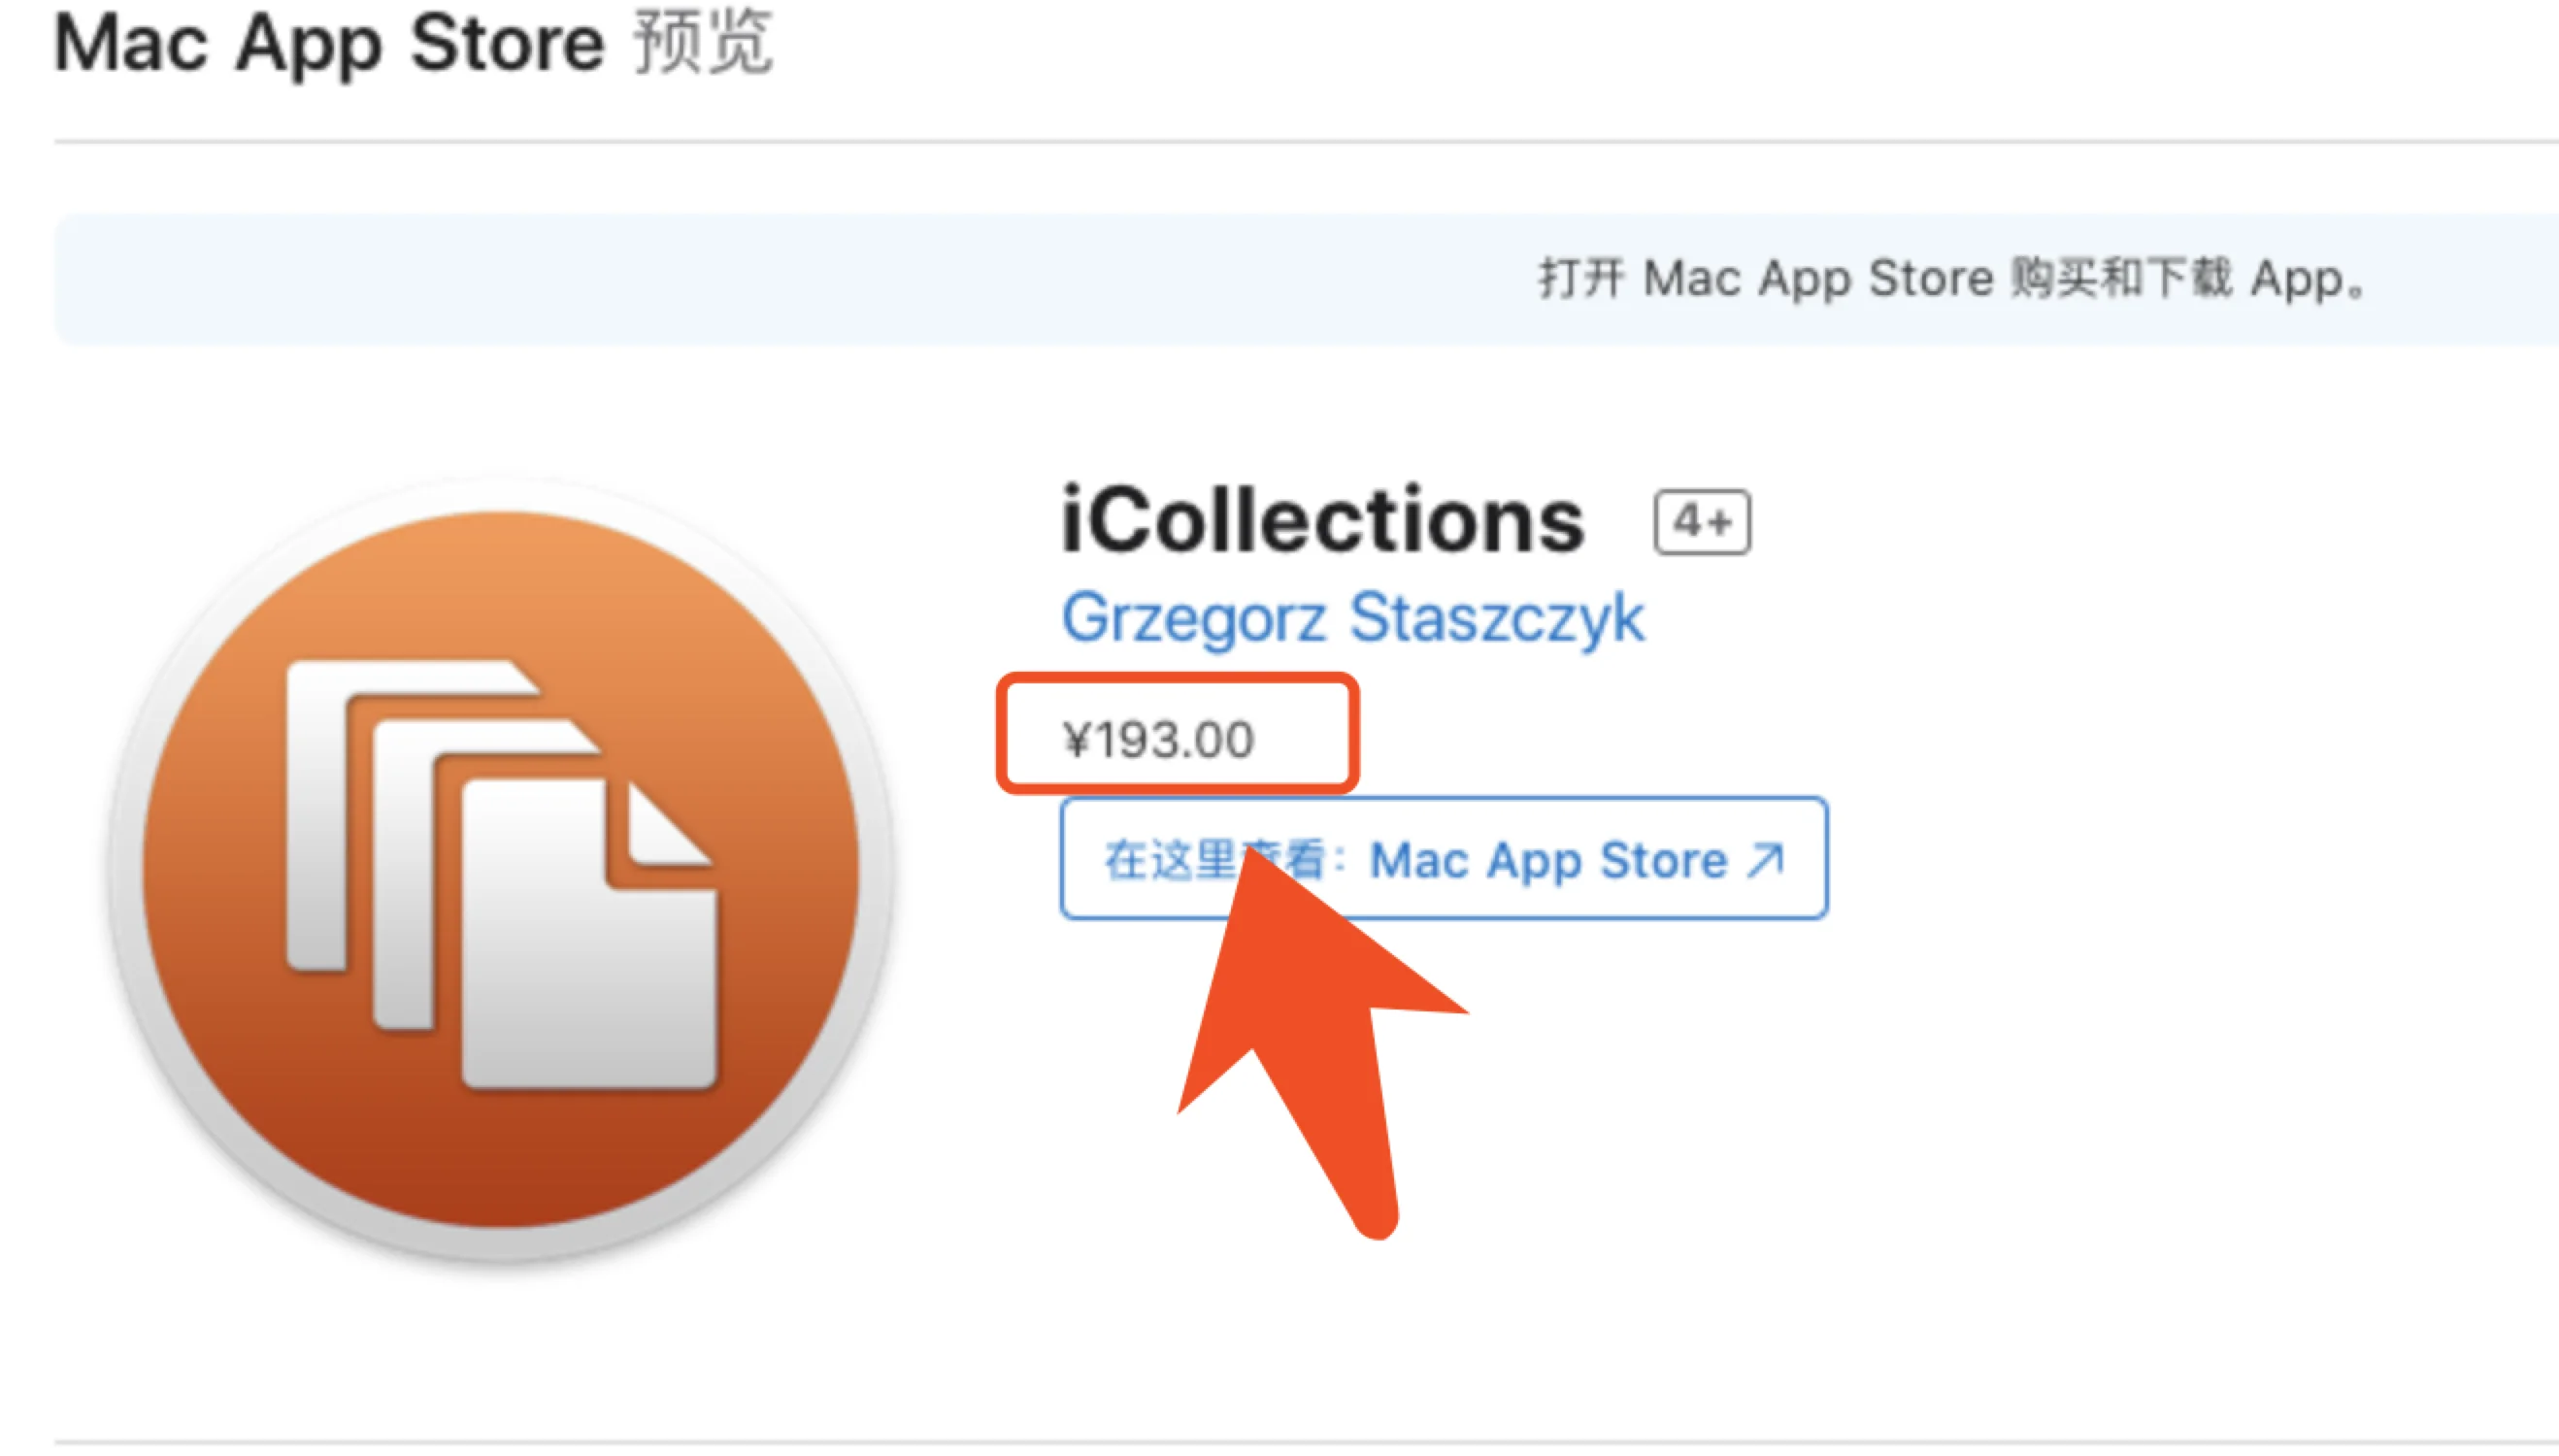 iCollections 6.5.2 (65202) 组织你的桌面图标-马克喵